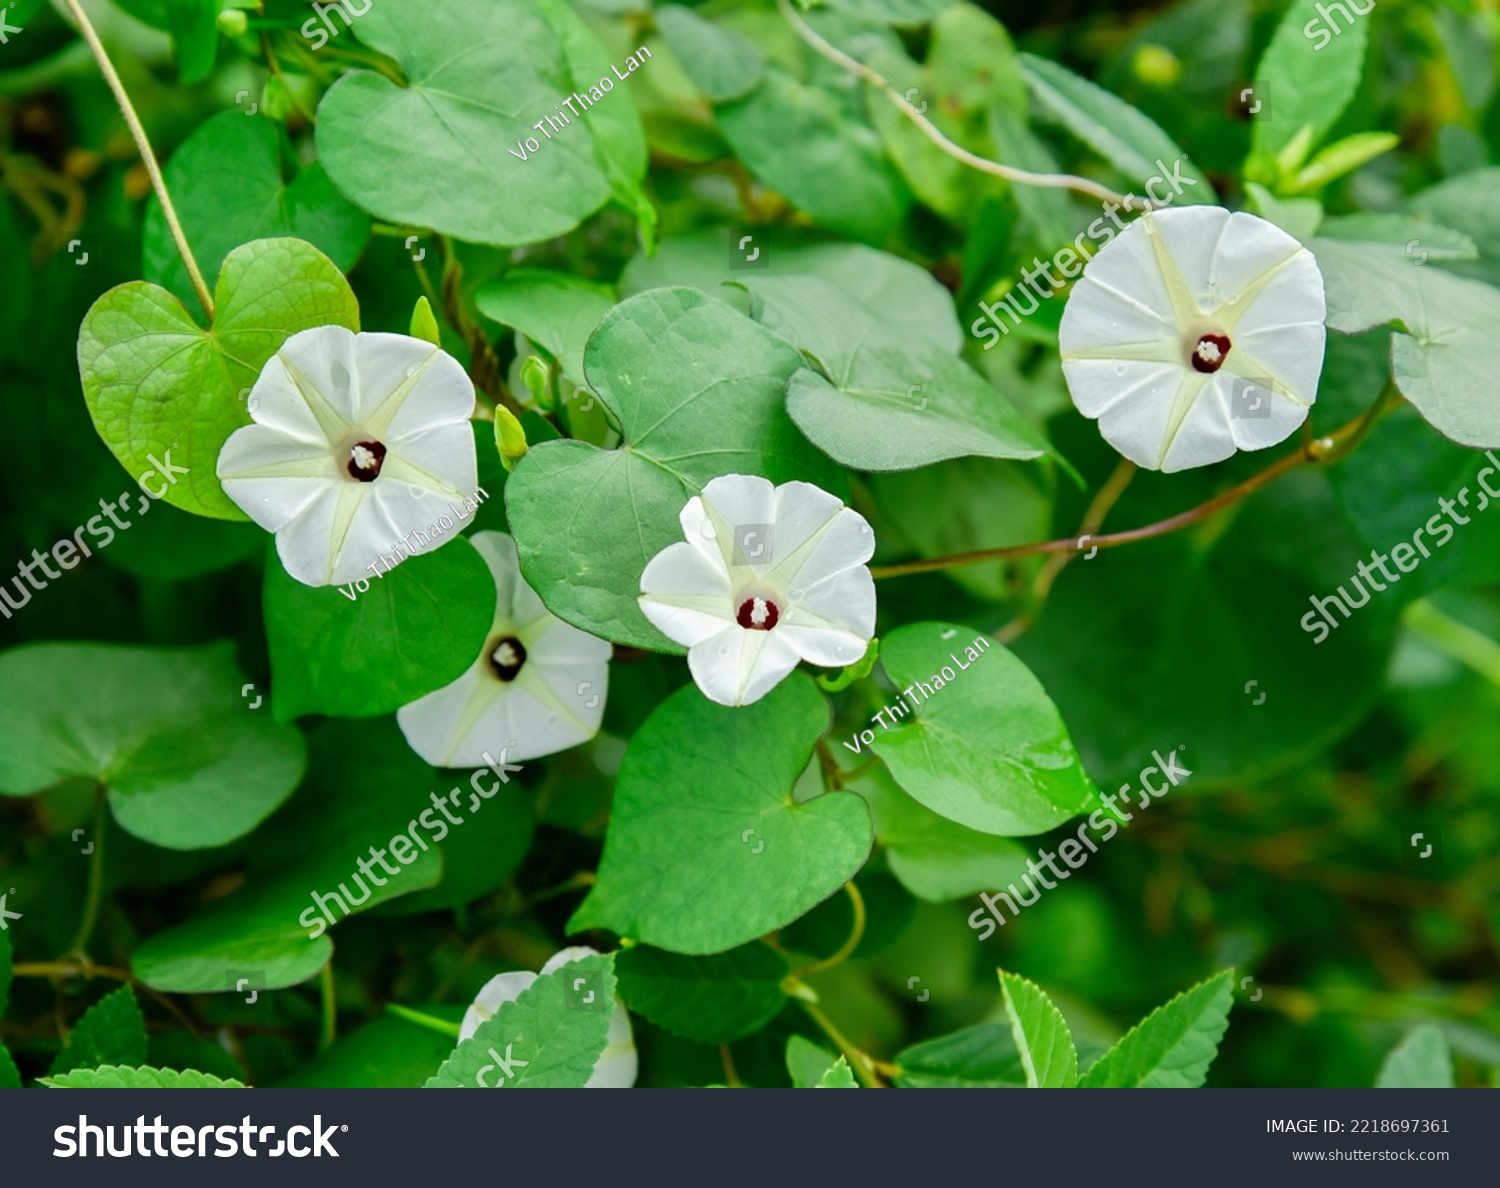 Ipomoea alba, commonly called moonflower, is native to tropical America. It is a tender perennial vine that is grown in St. Louis as a warm weather annual. #2218697361